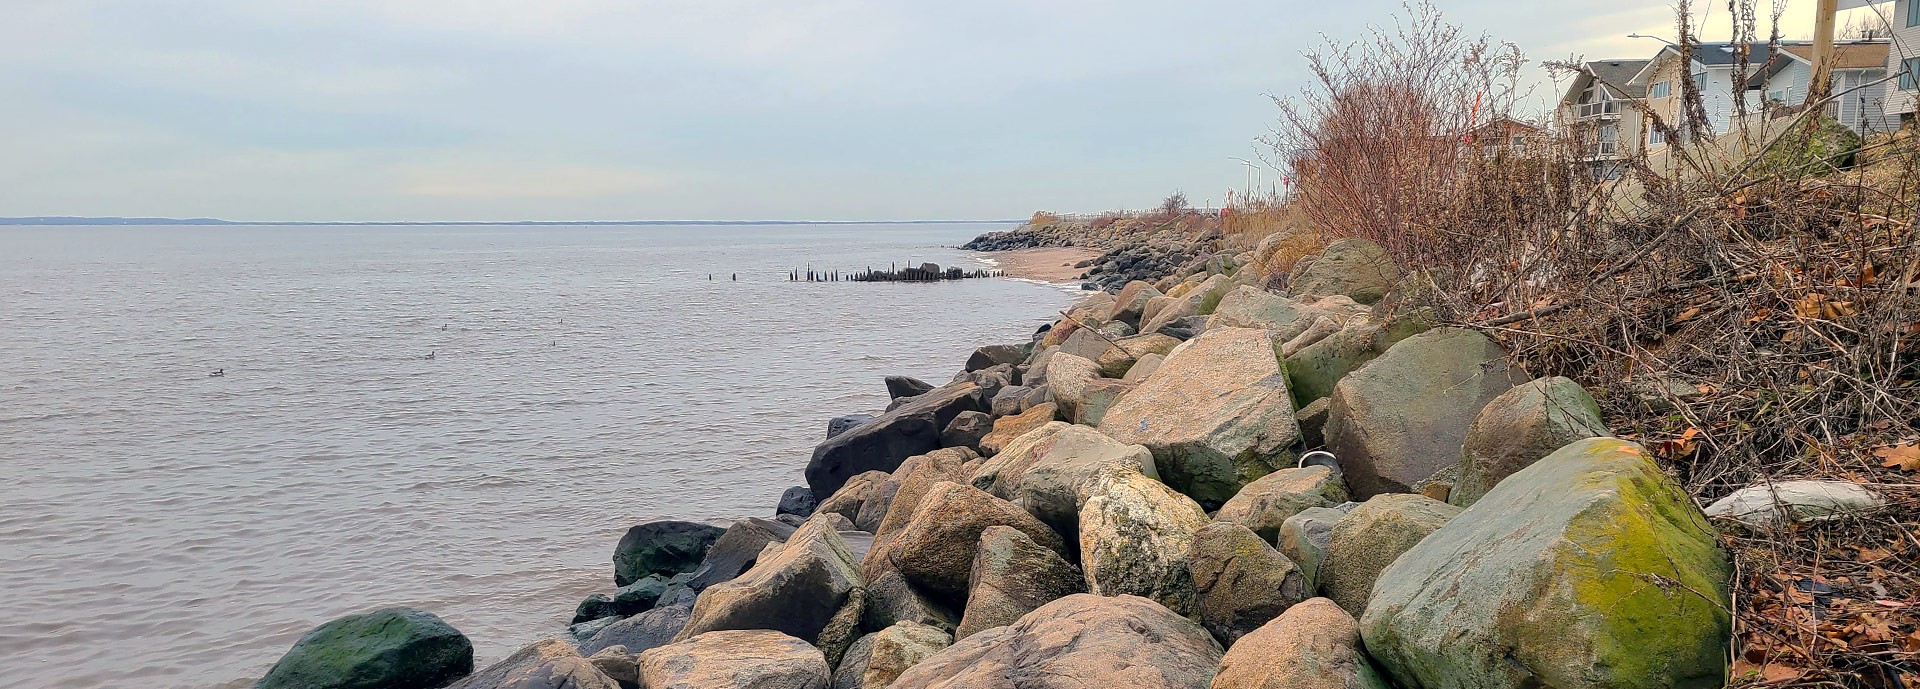 rocky shoreline on right side and water on left with houses in distance